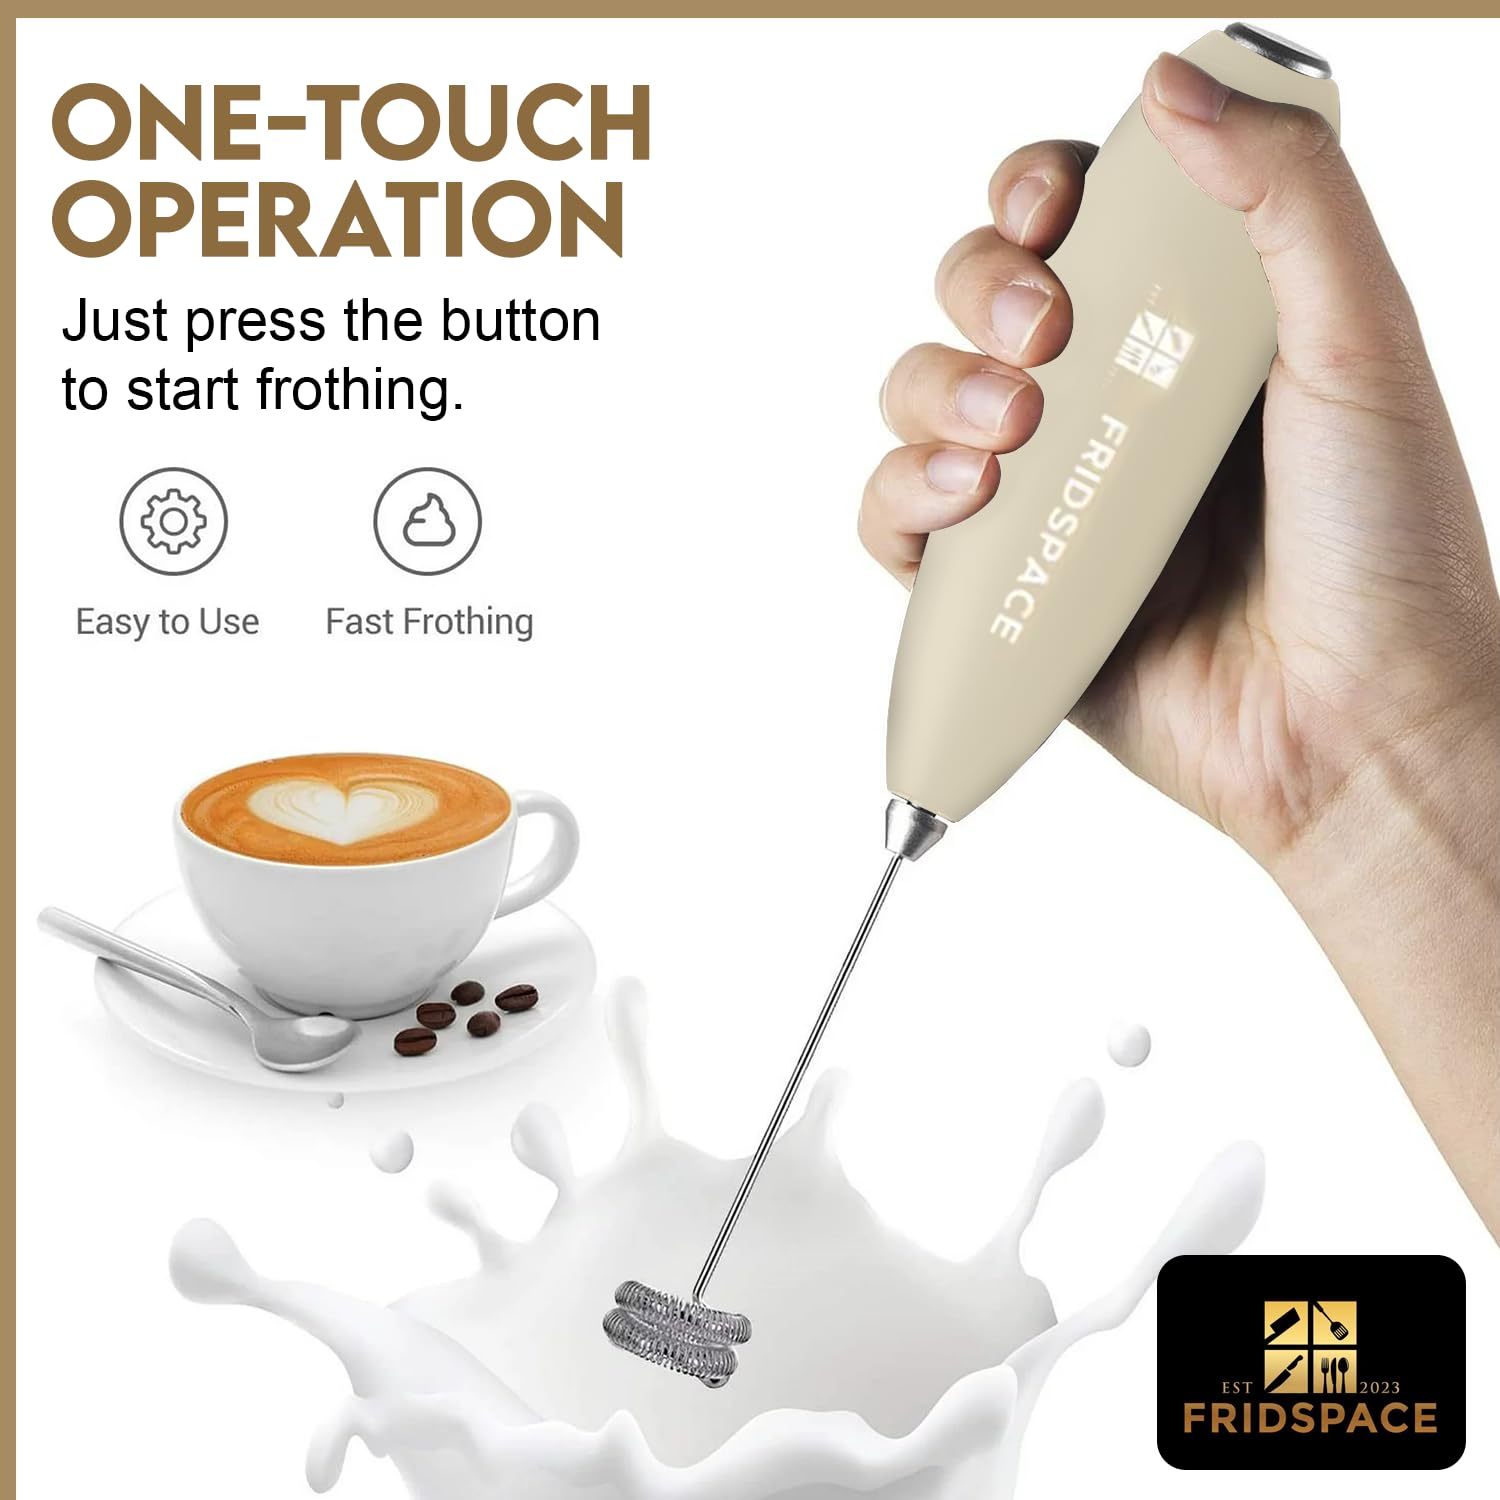 Handheld portable milk frother durable double whisk electric coffee machine, battery operated stainless steel milk mixer with stand, instant foam maker for latte, cappuccino, hot chocolate, Frappe